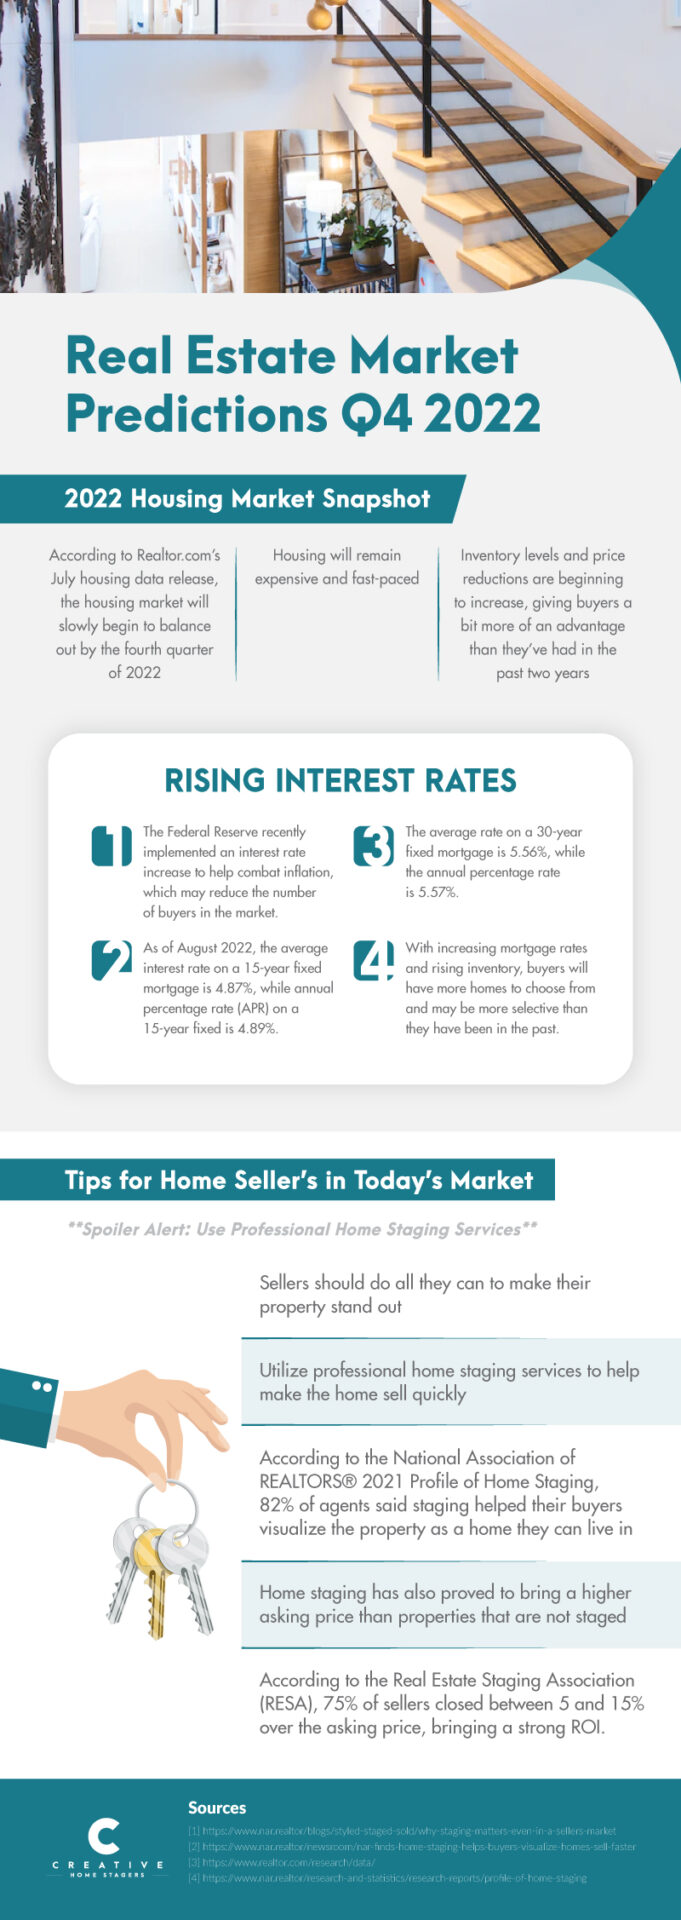 CHS-Real-Estate-Market-Predictions-Q4-2022-INFOGRAPHIC